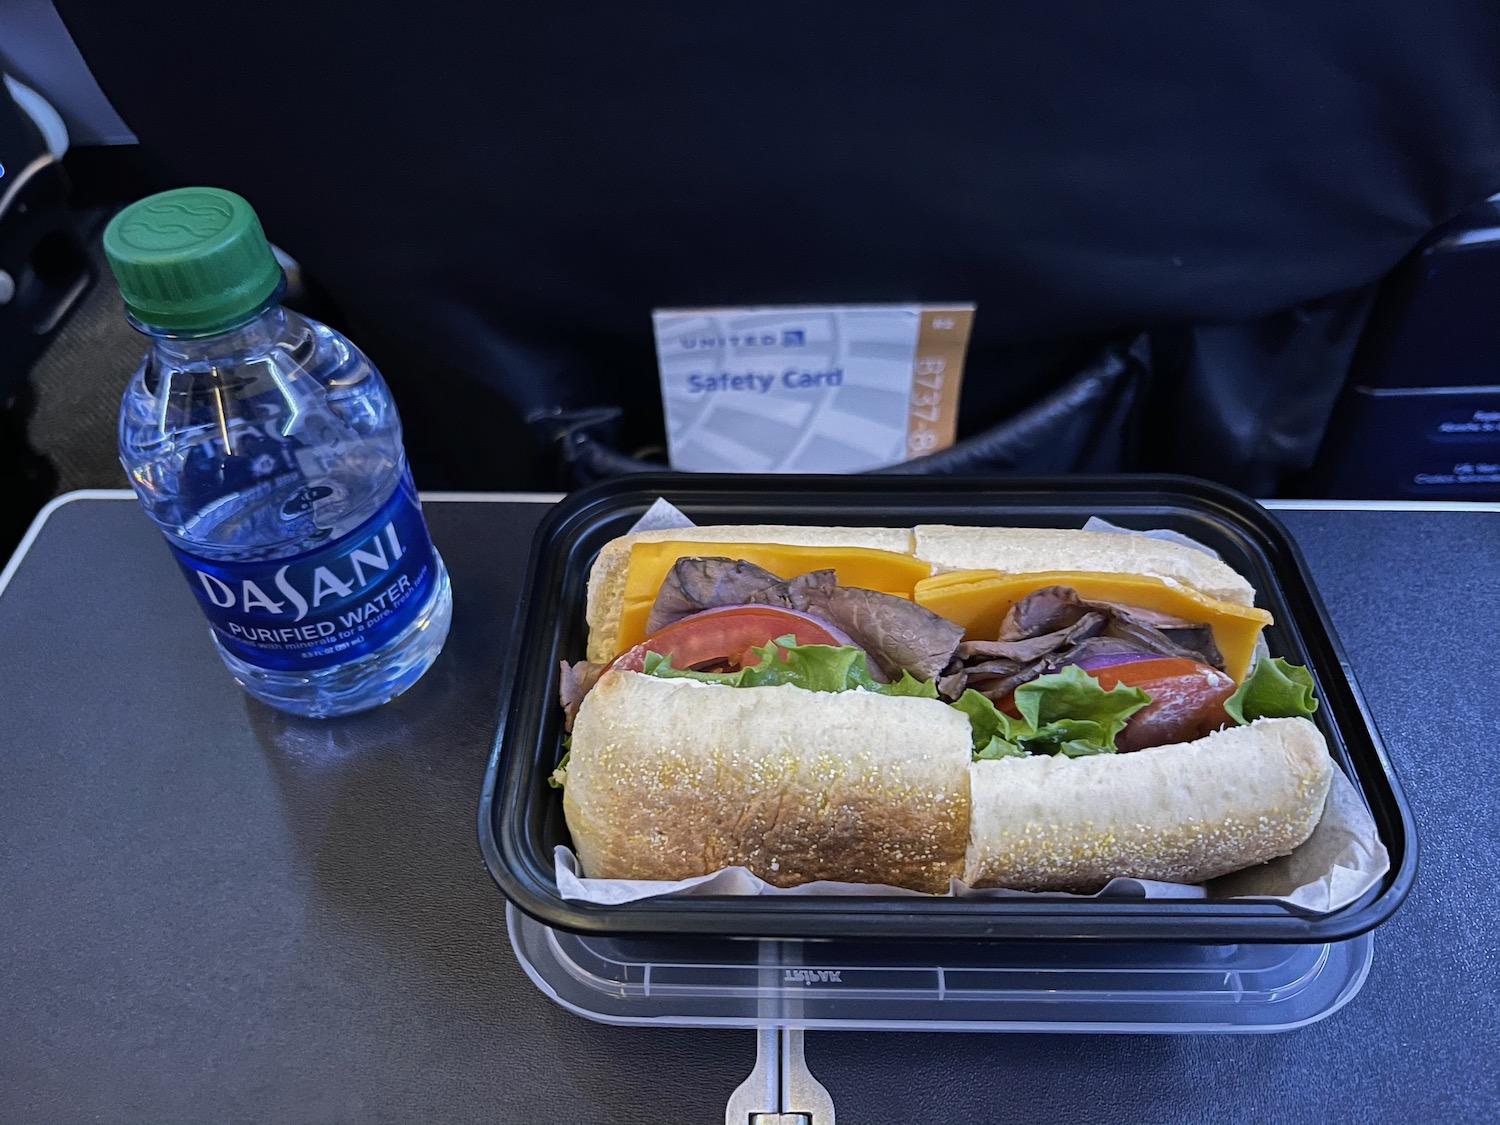 a sandwich in a container next to a bottle of water